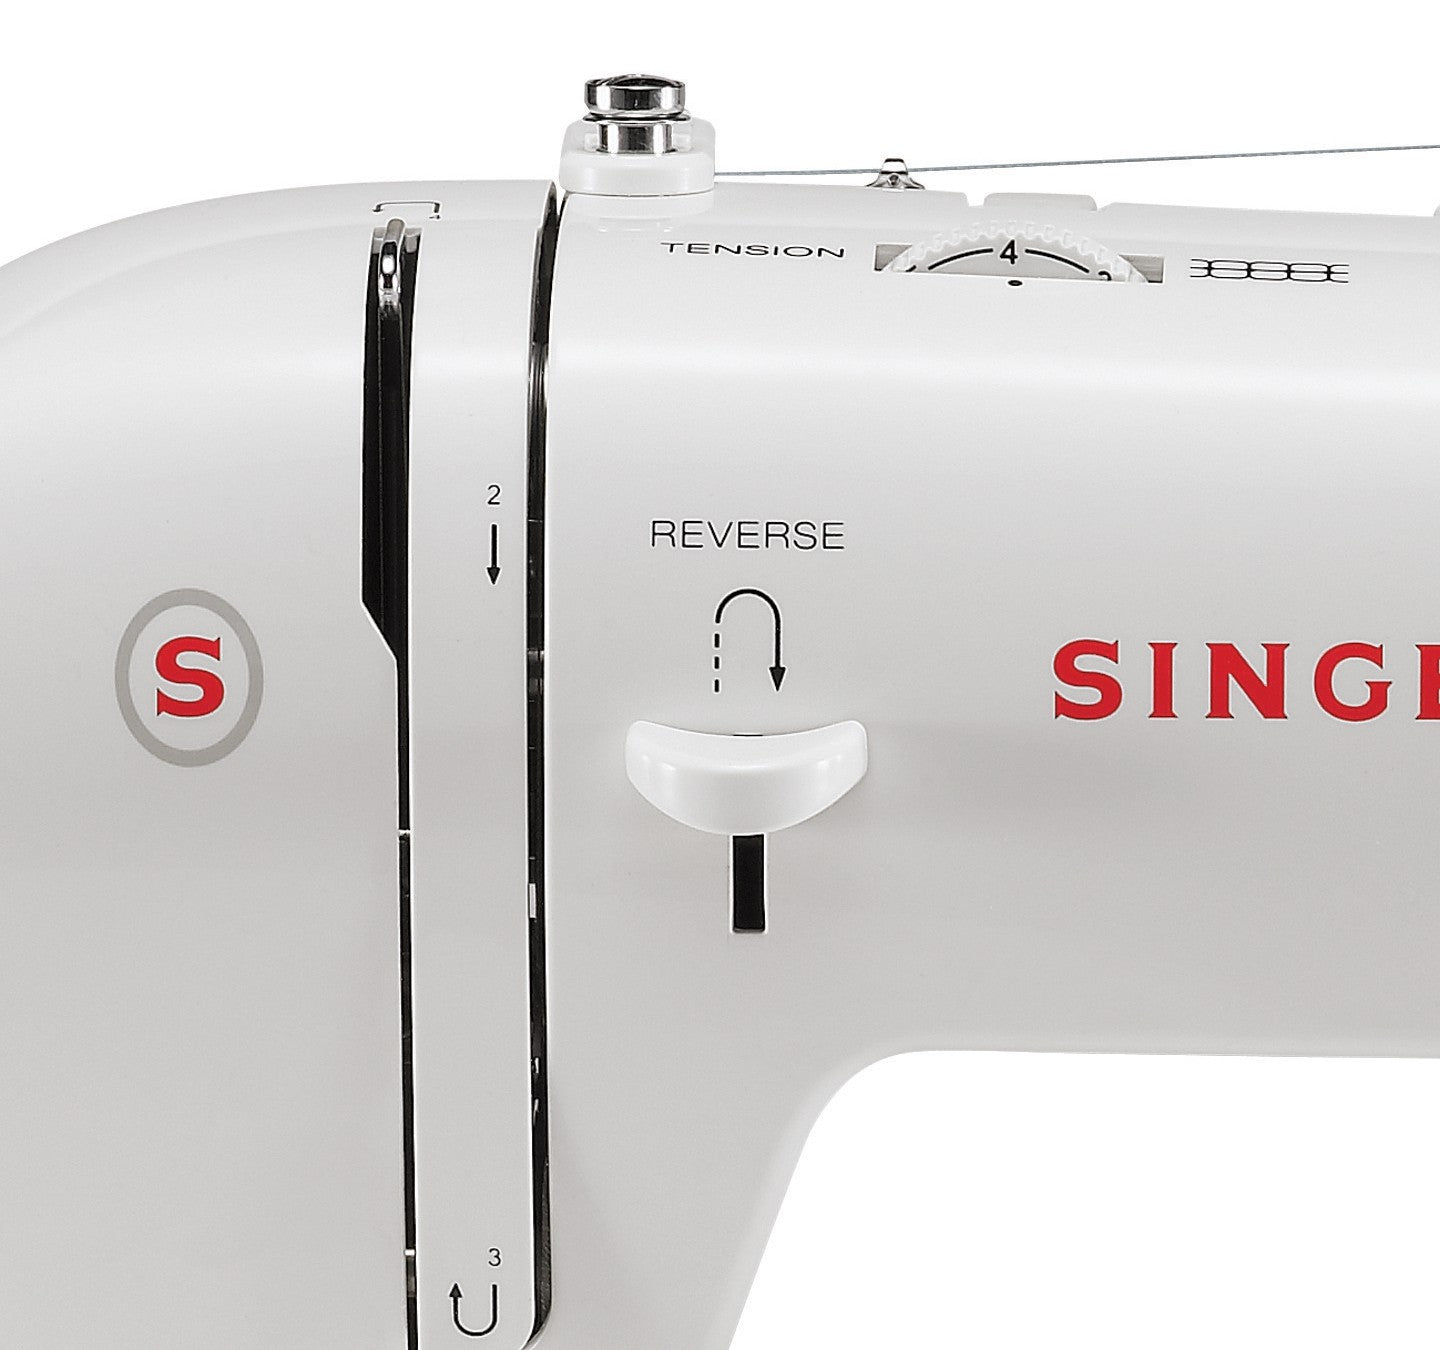 Singer - Tradition 2282 Sewing Machine – Home Hyper City